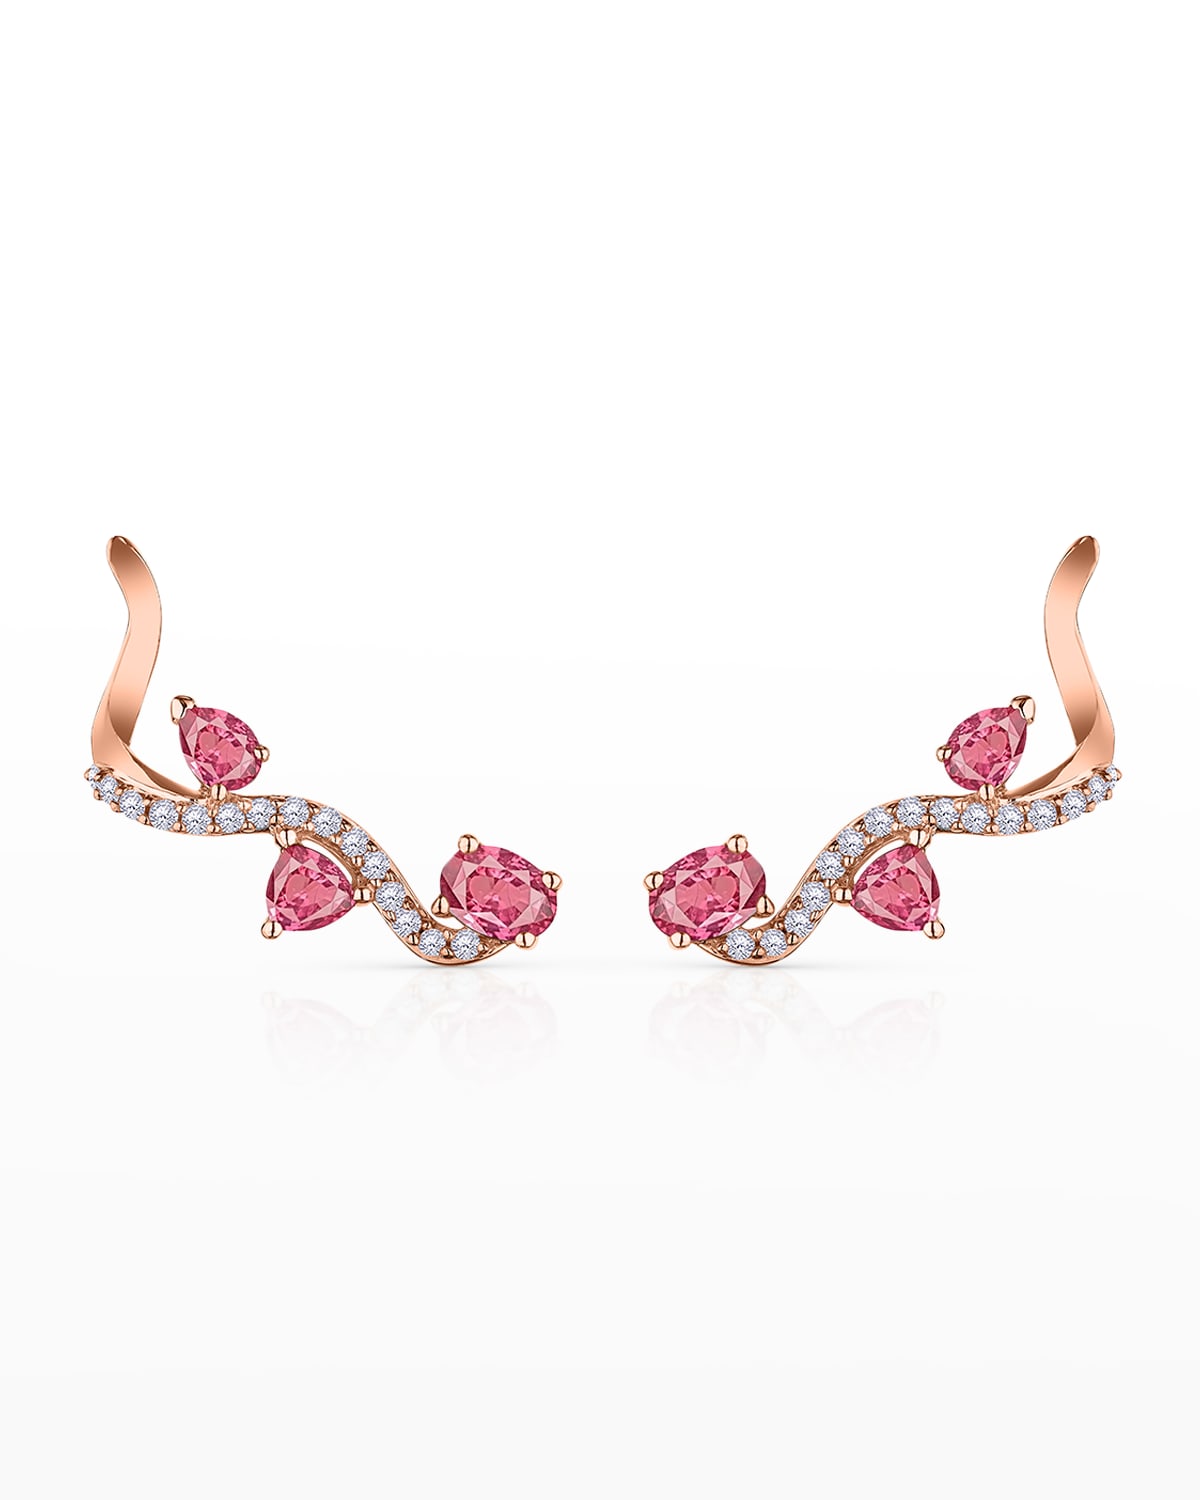 Mirage Pink Gold Earrings with Diamonds and Pink Sapphires